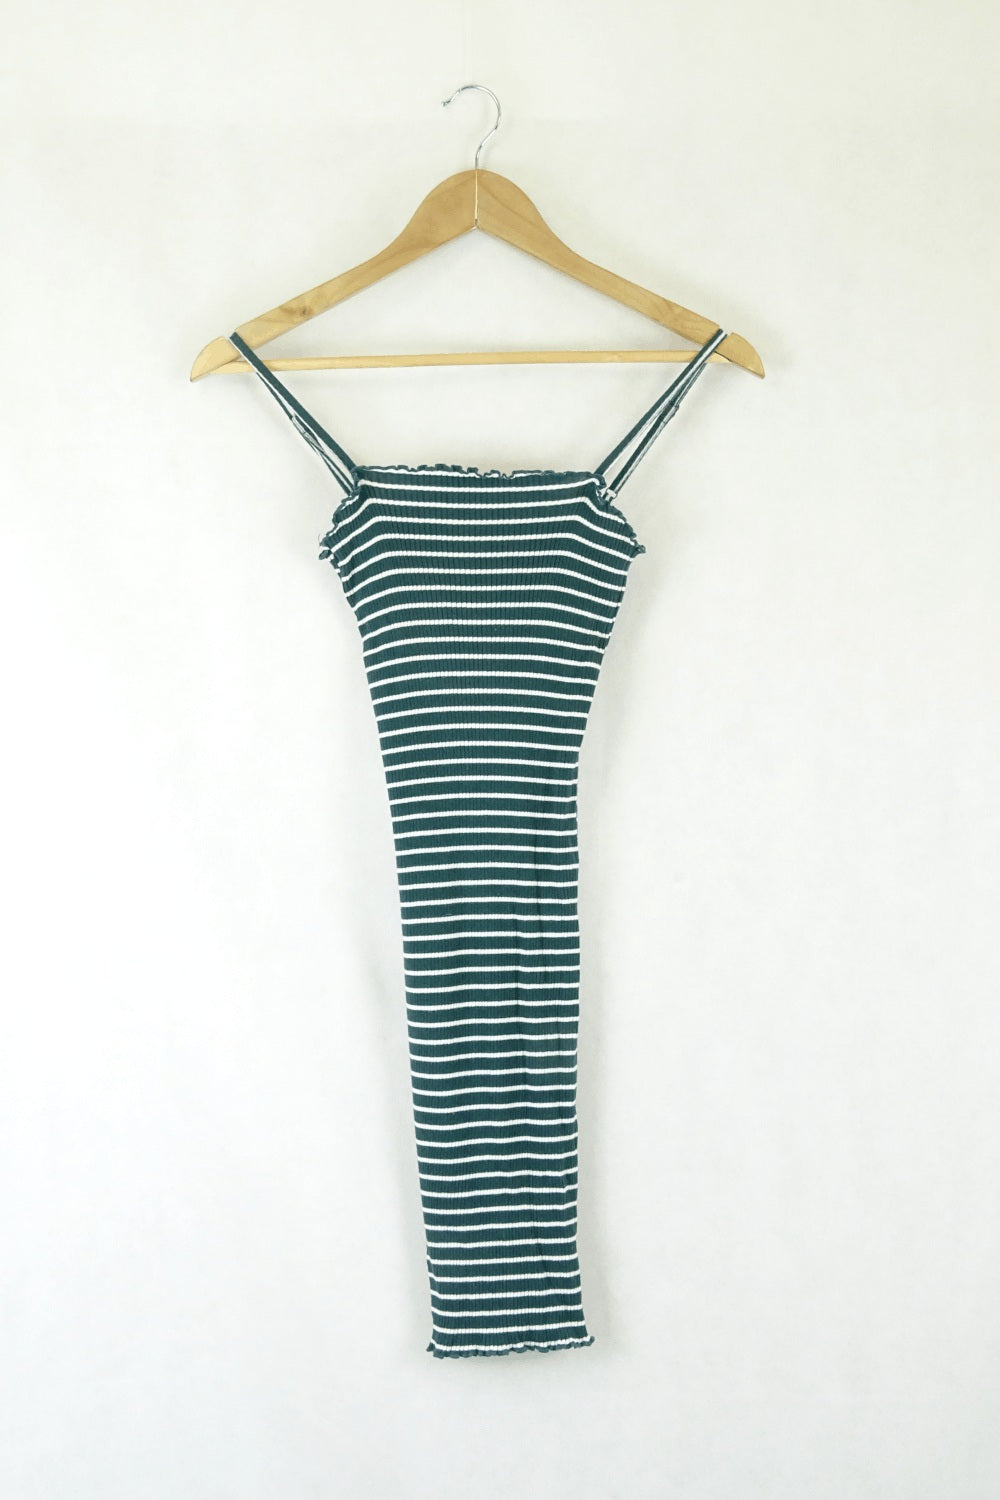 Pare Basic Striped White And Green Dress 6